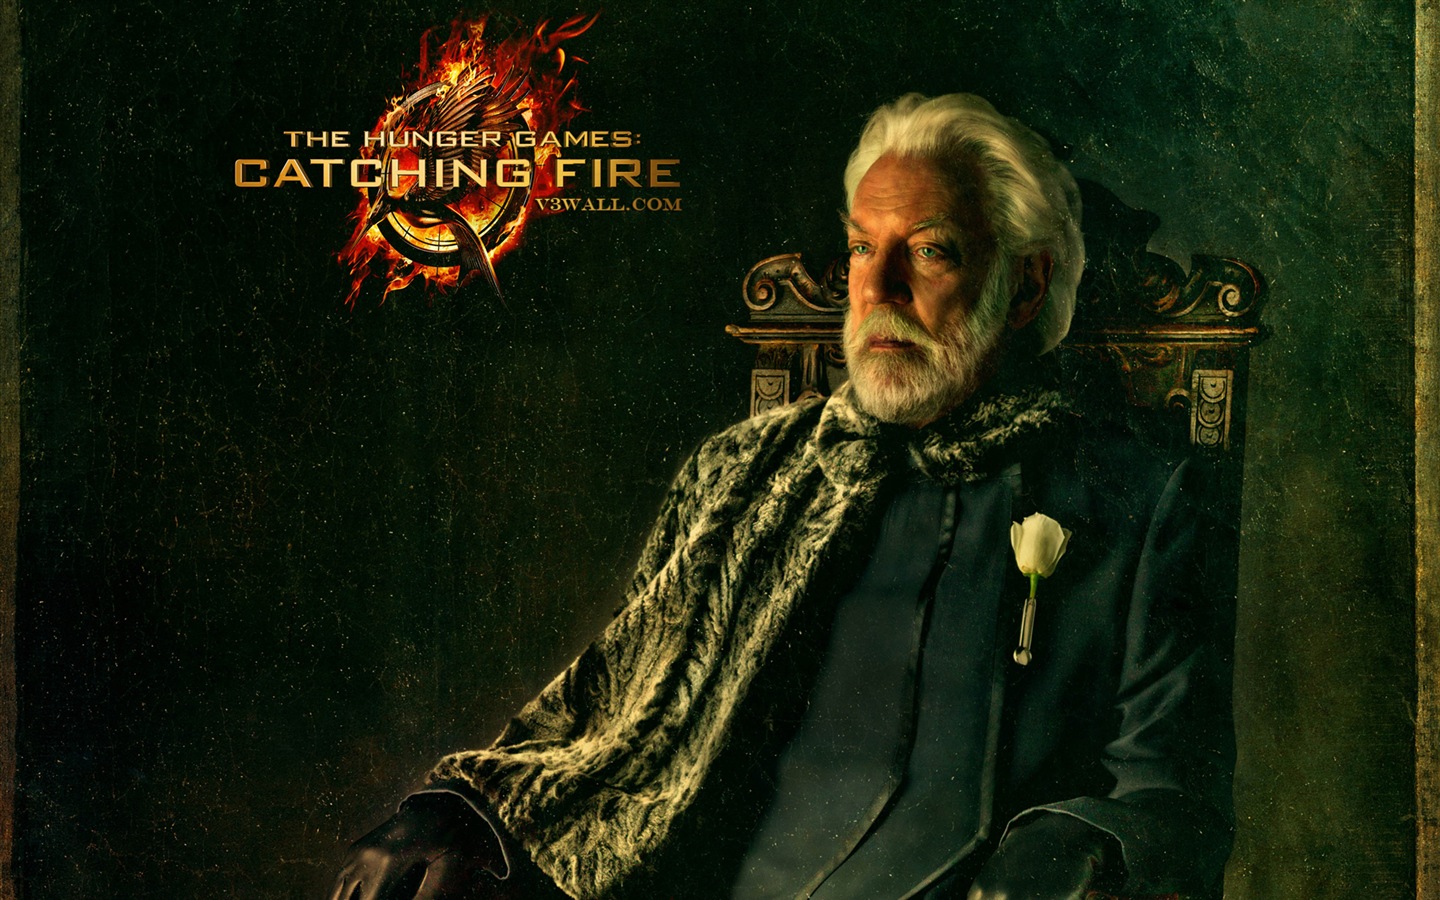 The Hunger Games 2: Catching Fire HD wallpapers #3 - 1440x900